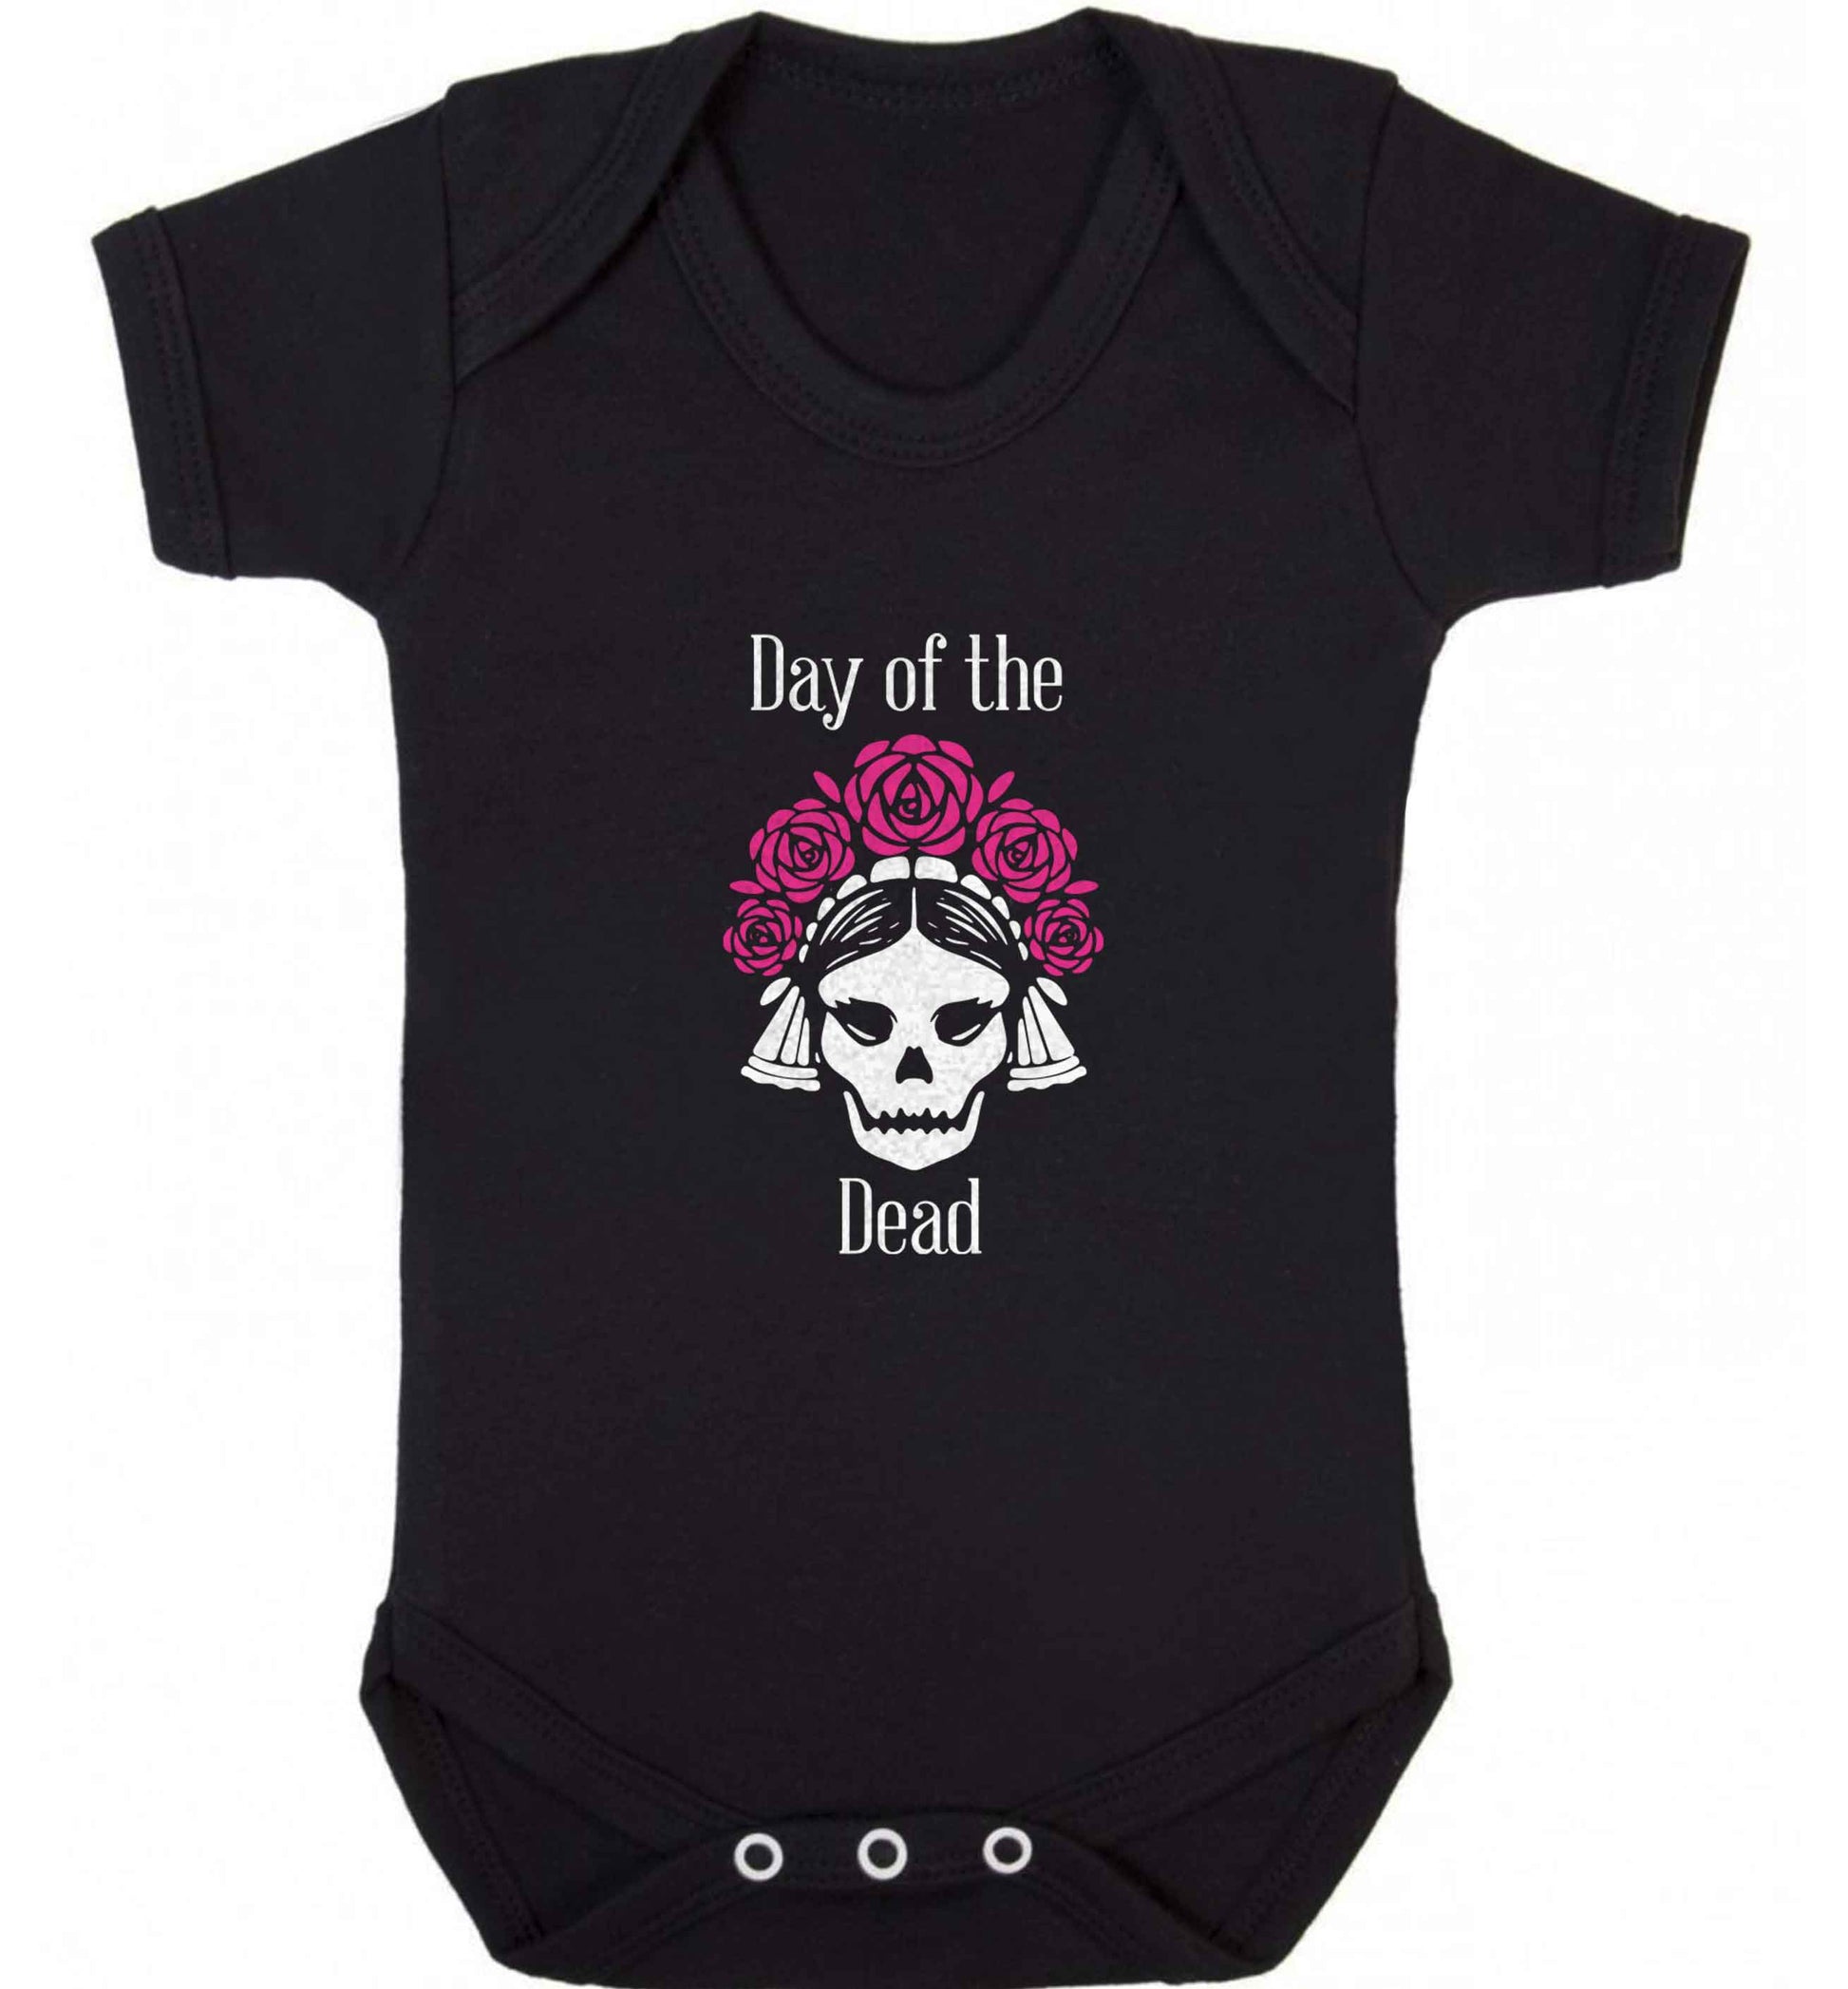 Day of the dead baby vest black 18-24 months